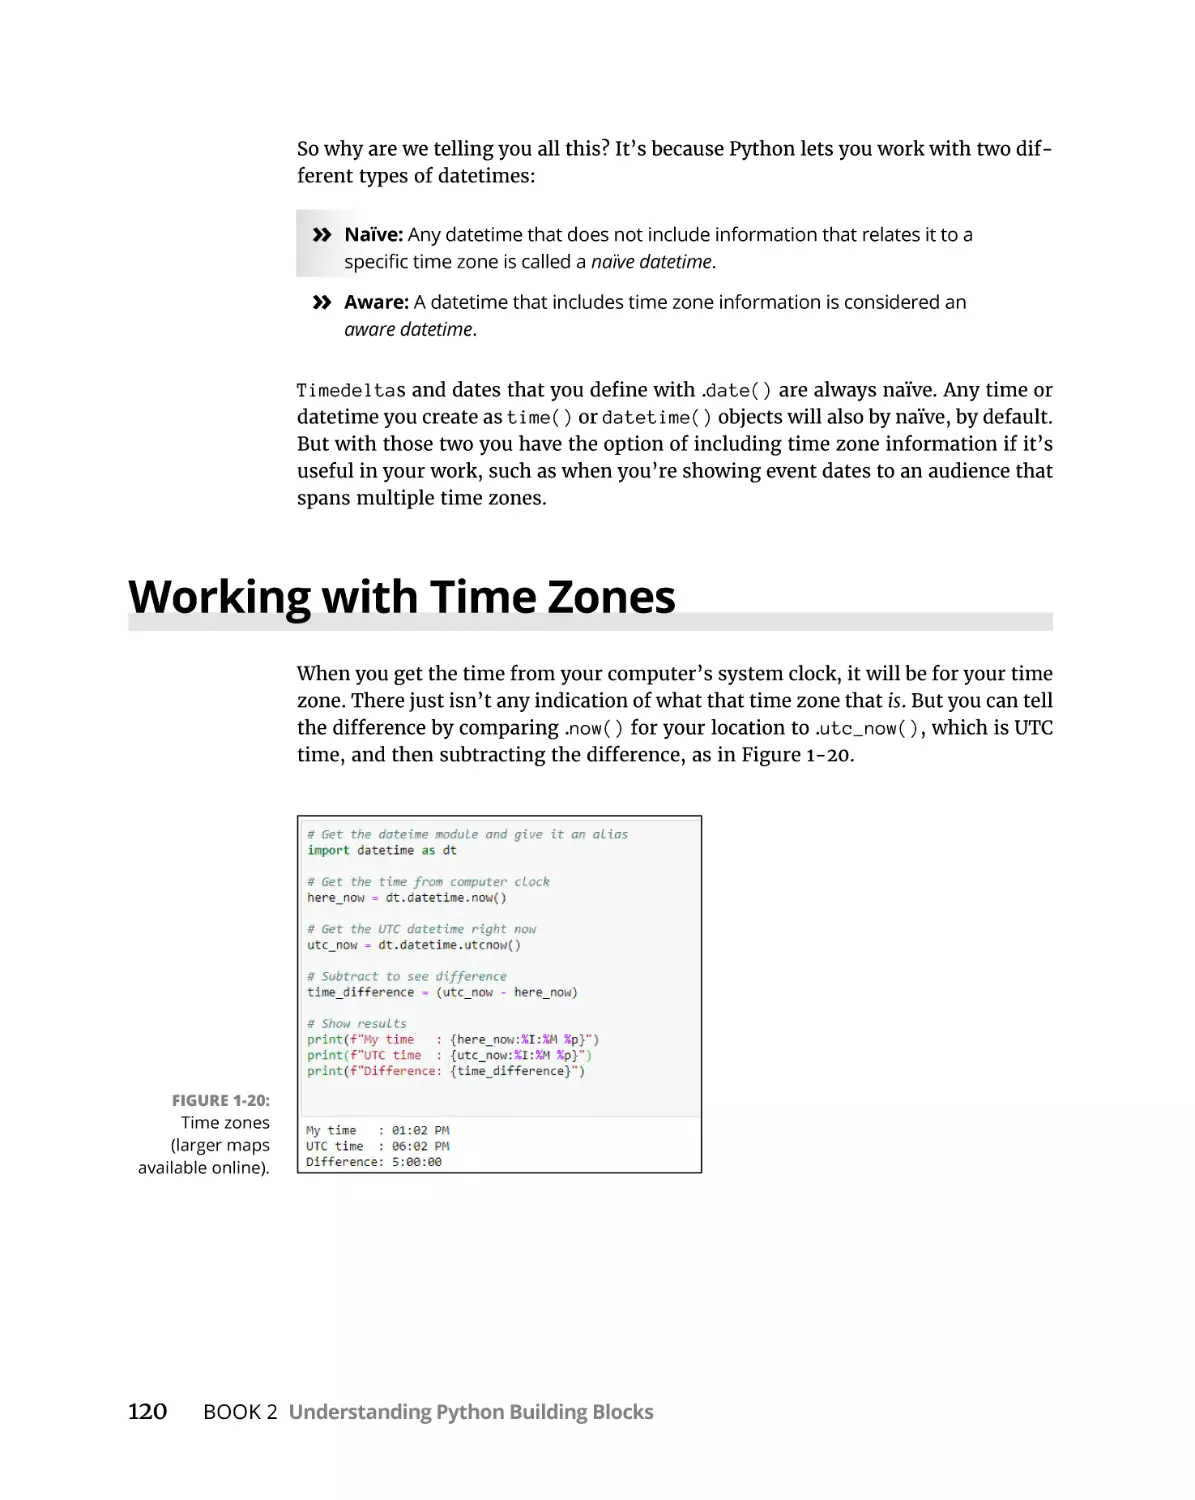 Working with Time Zones